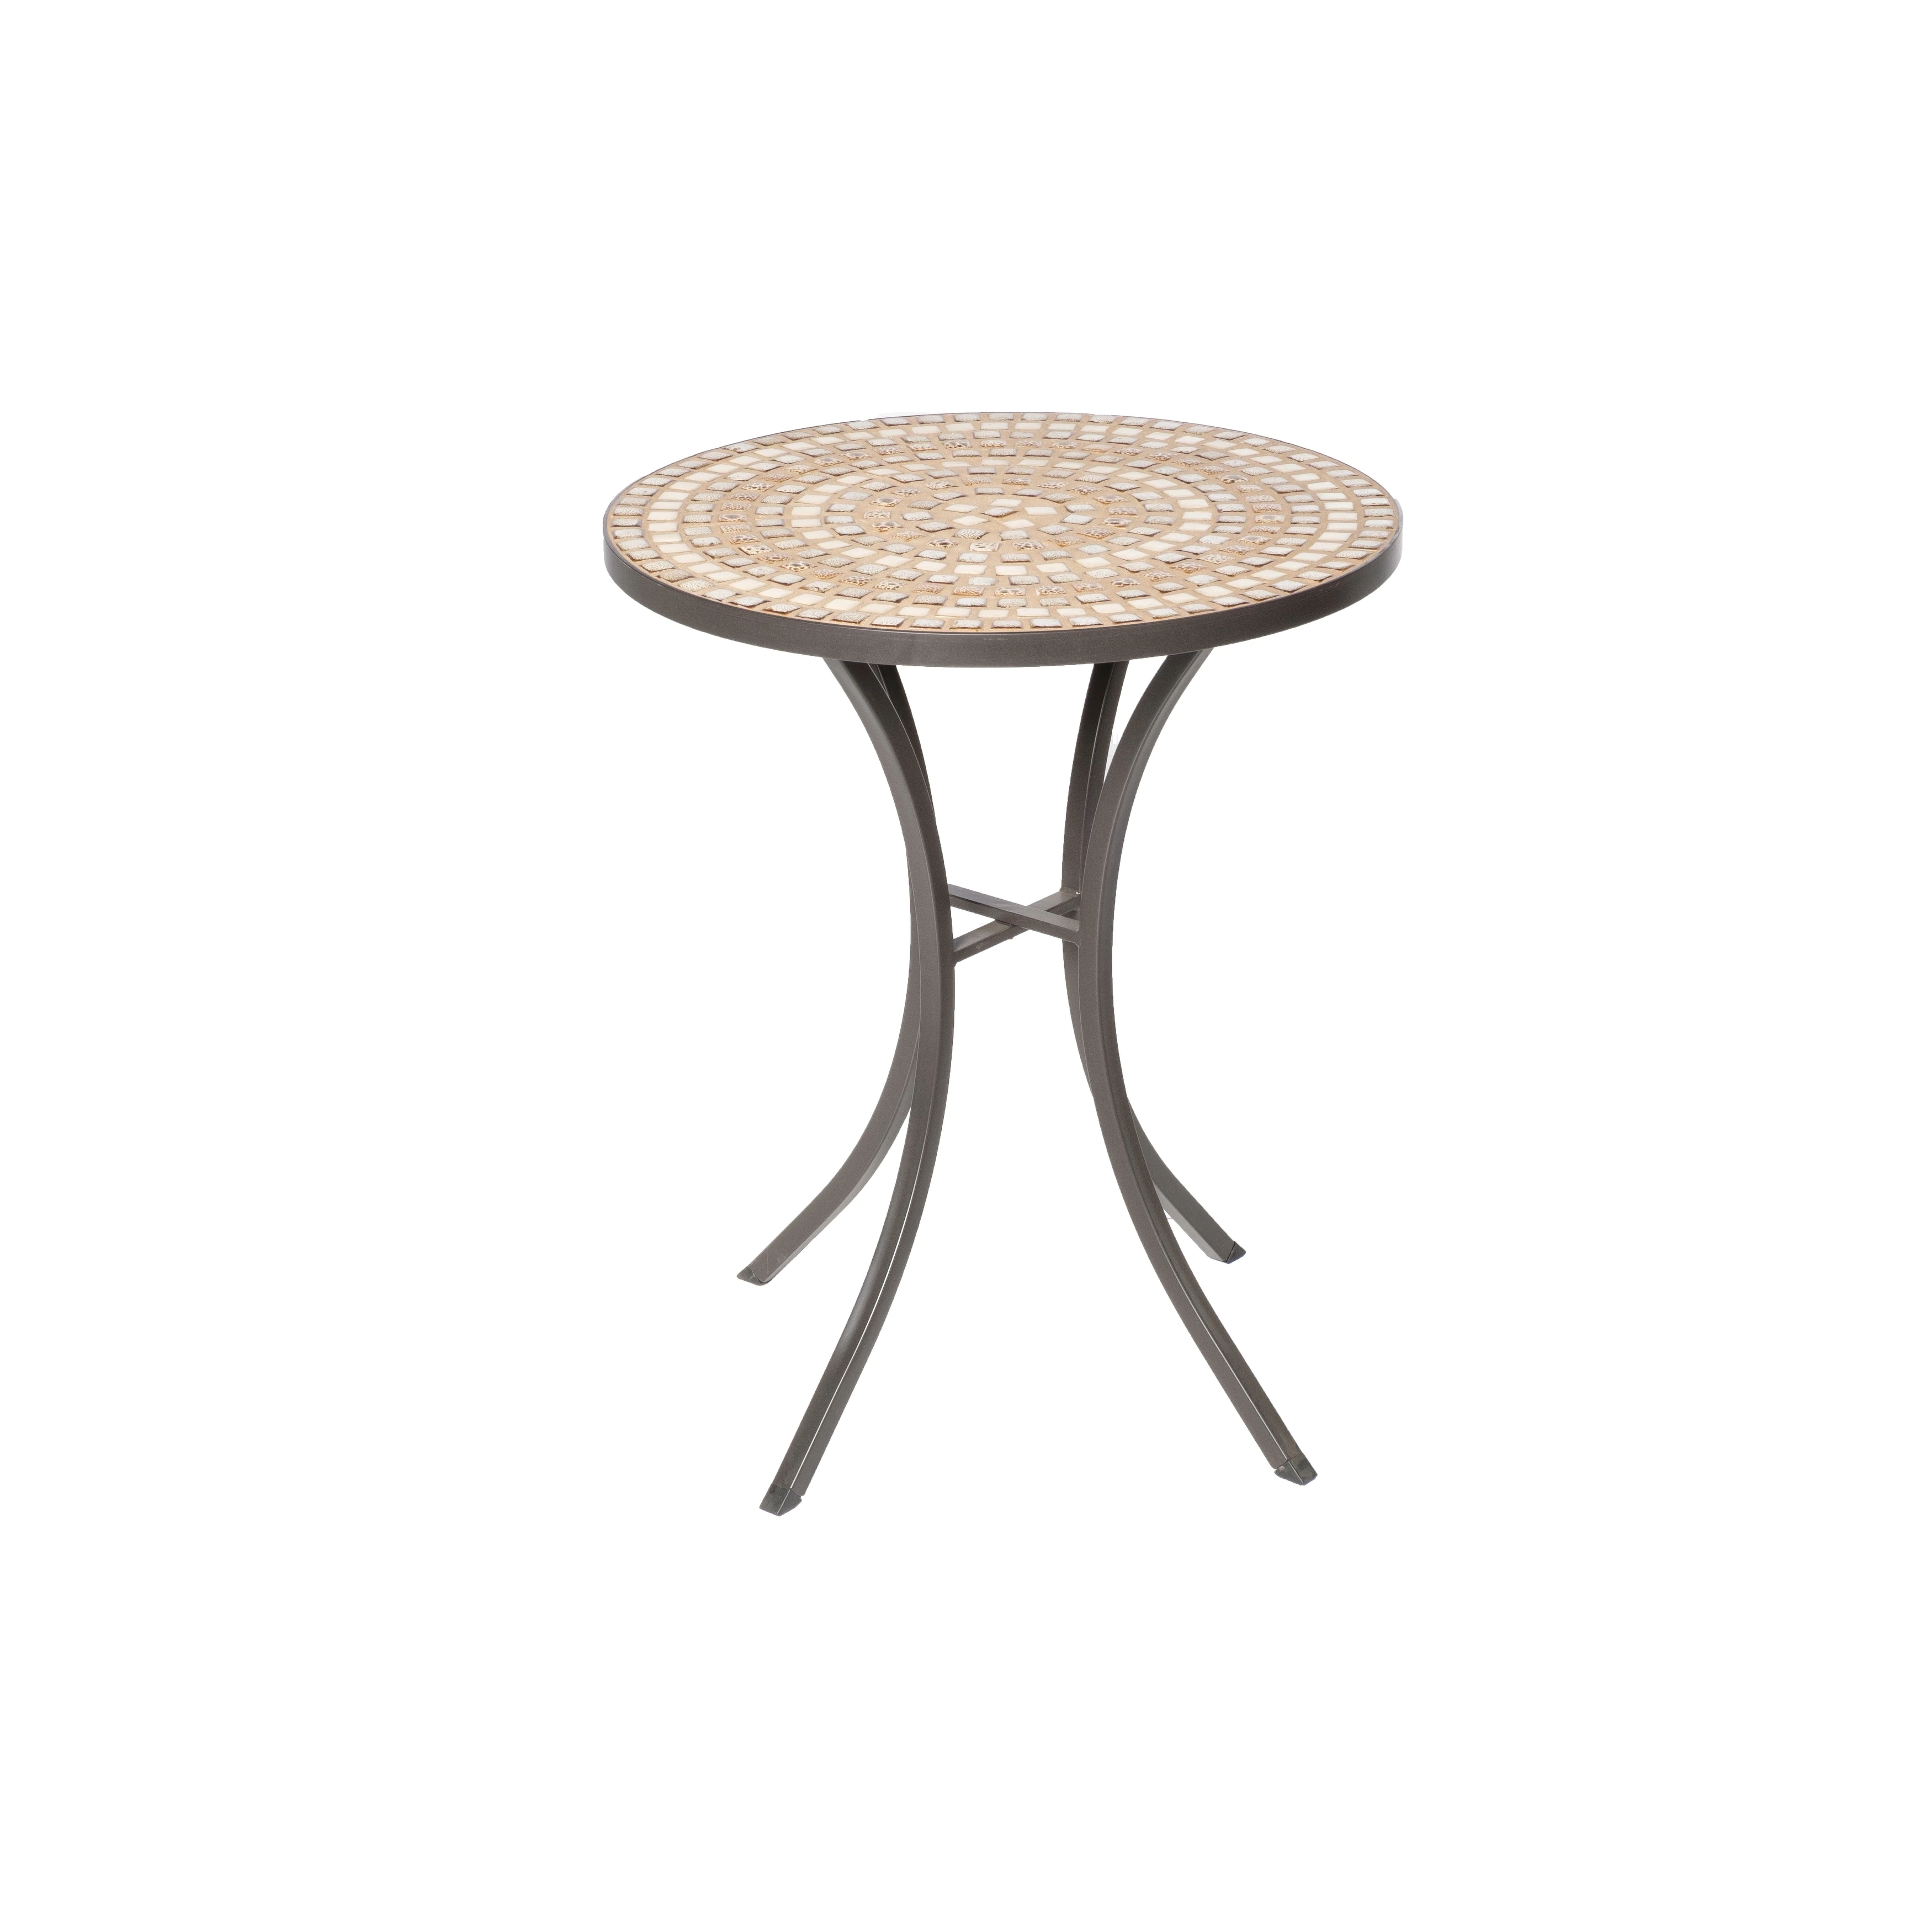 boracay beige ceramic and wrought iron inch round mosaic outdoor side table with tile top base free shipping today elephant end tables glass ikea cube storage unit homesense